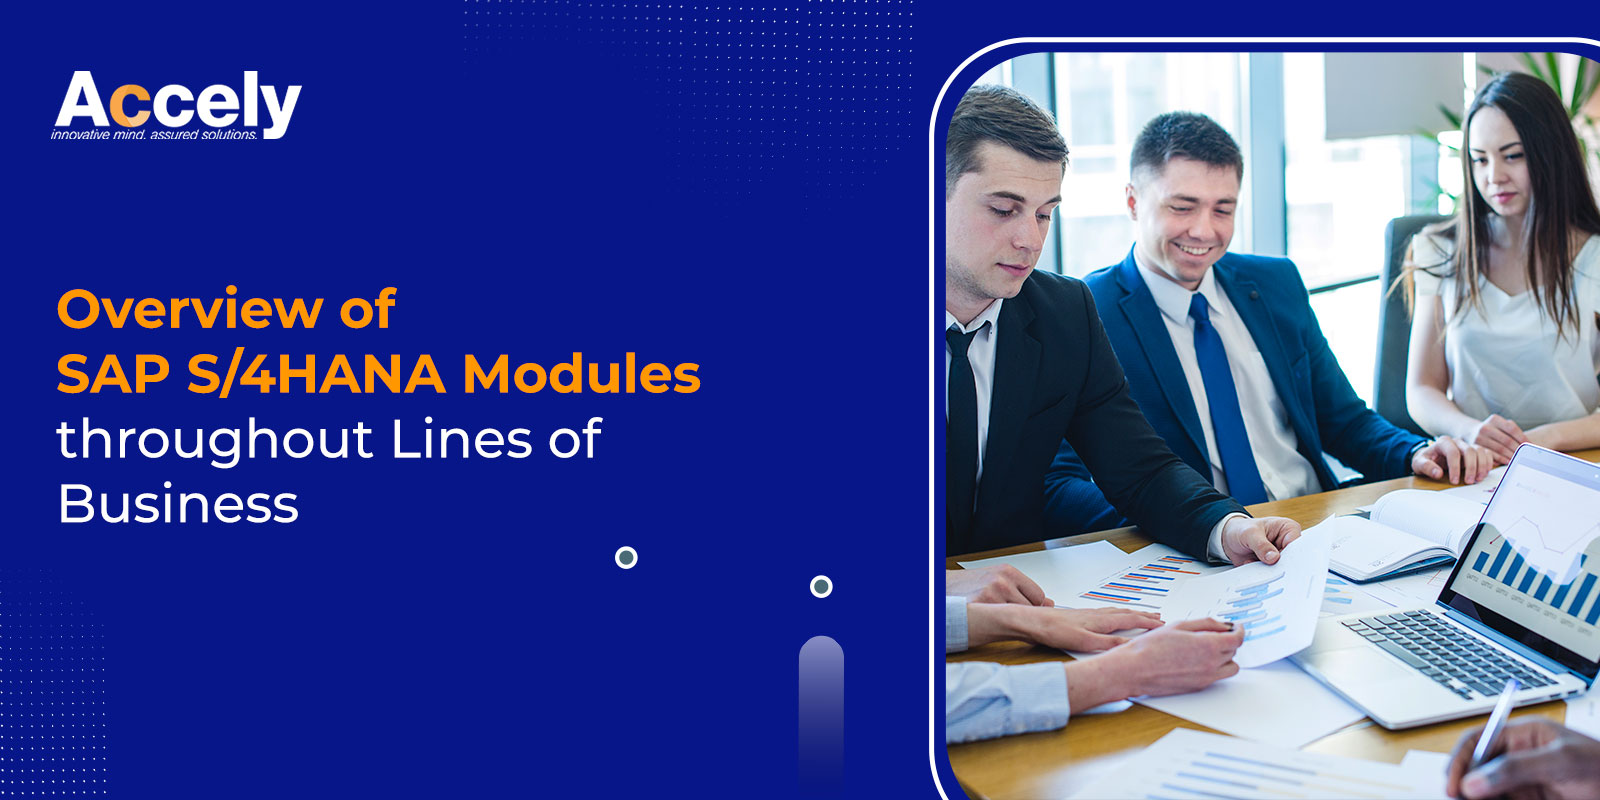 Overview of SAP S/4HANA Modules throughout Lines of Business